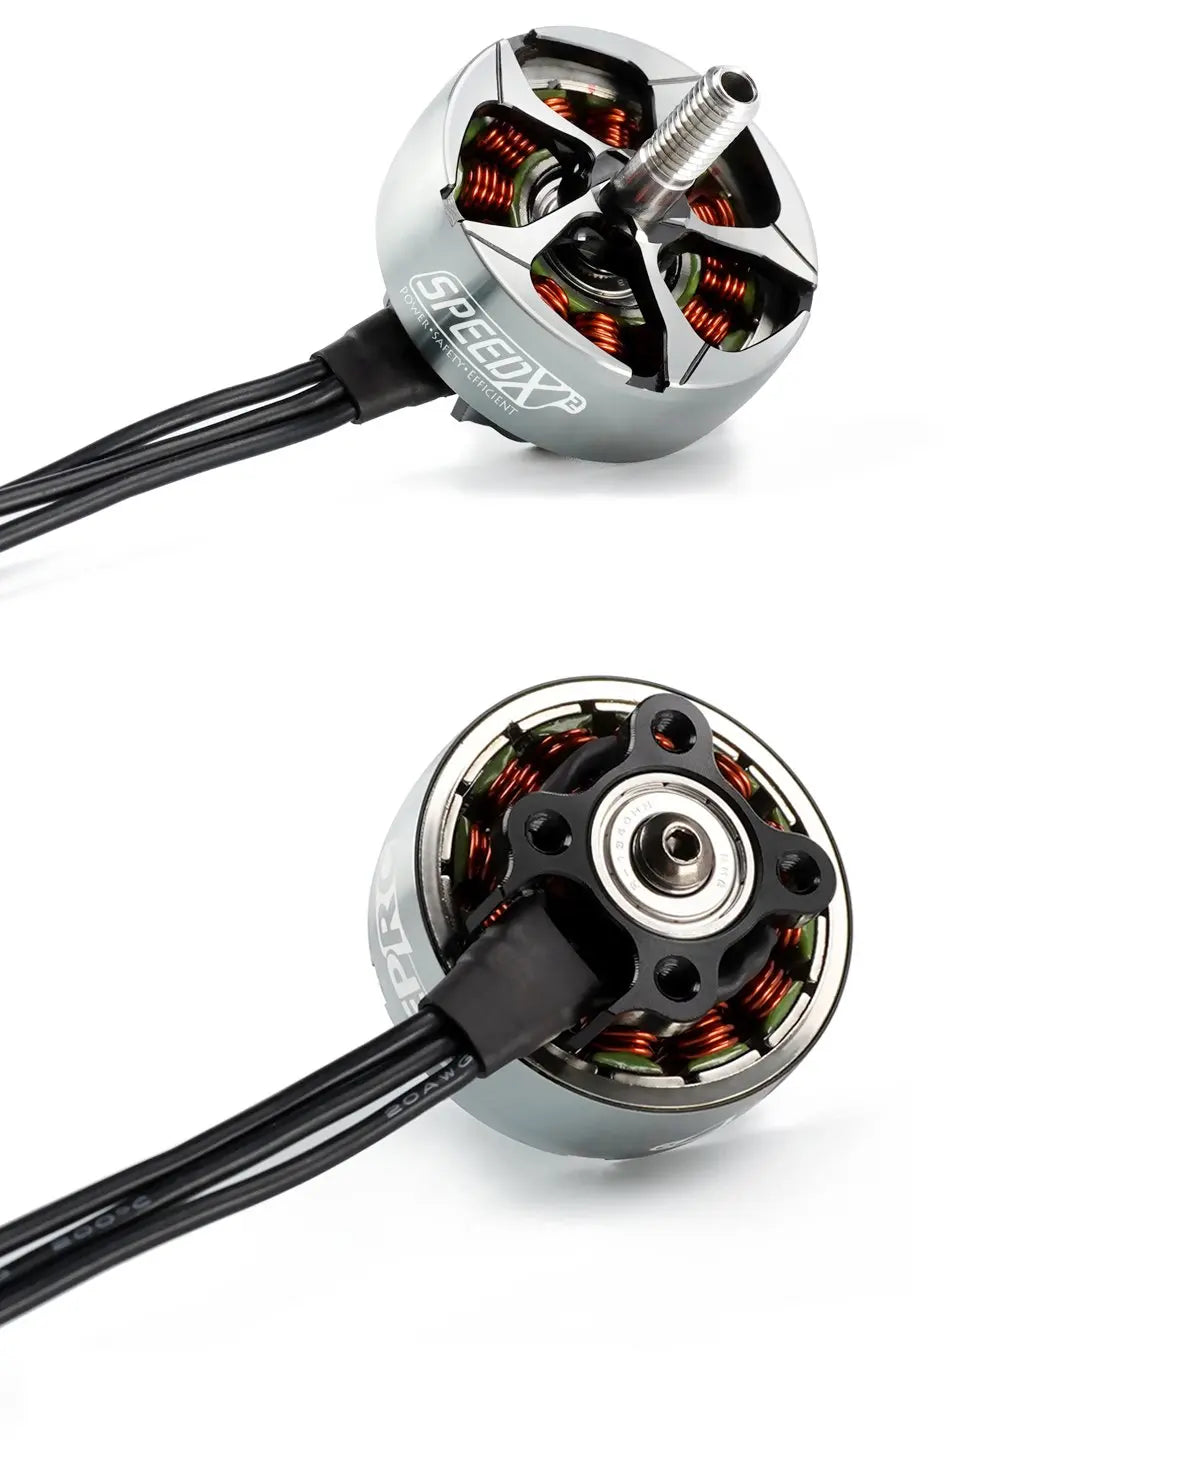 GEPRC SPEEDX2 2806.5 1350KV/1760KV Motor, we are pursuing lighter weight, more responsive, more efficient and more powerful brushless motors